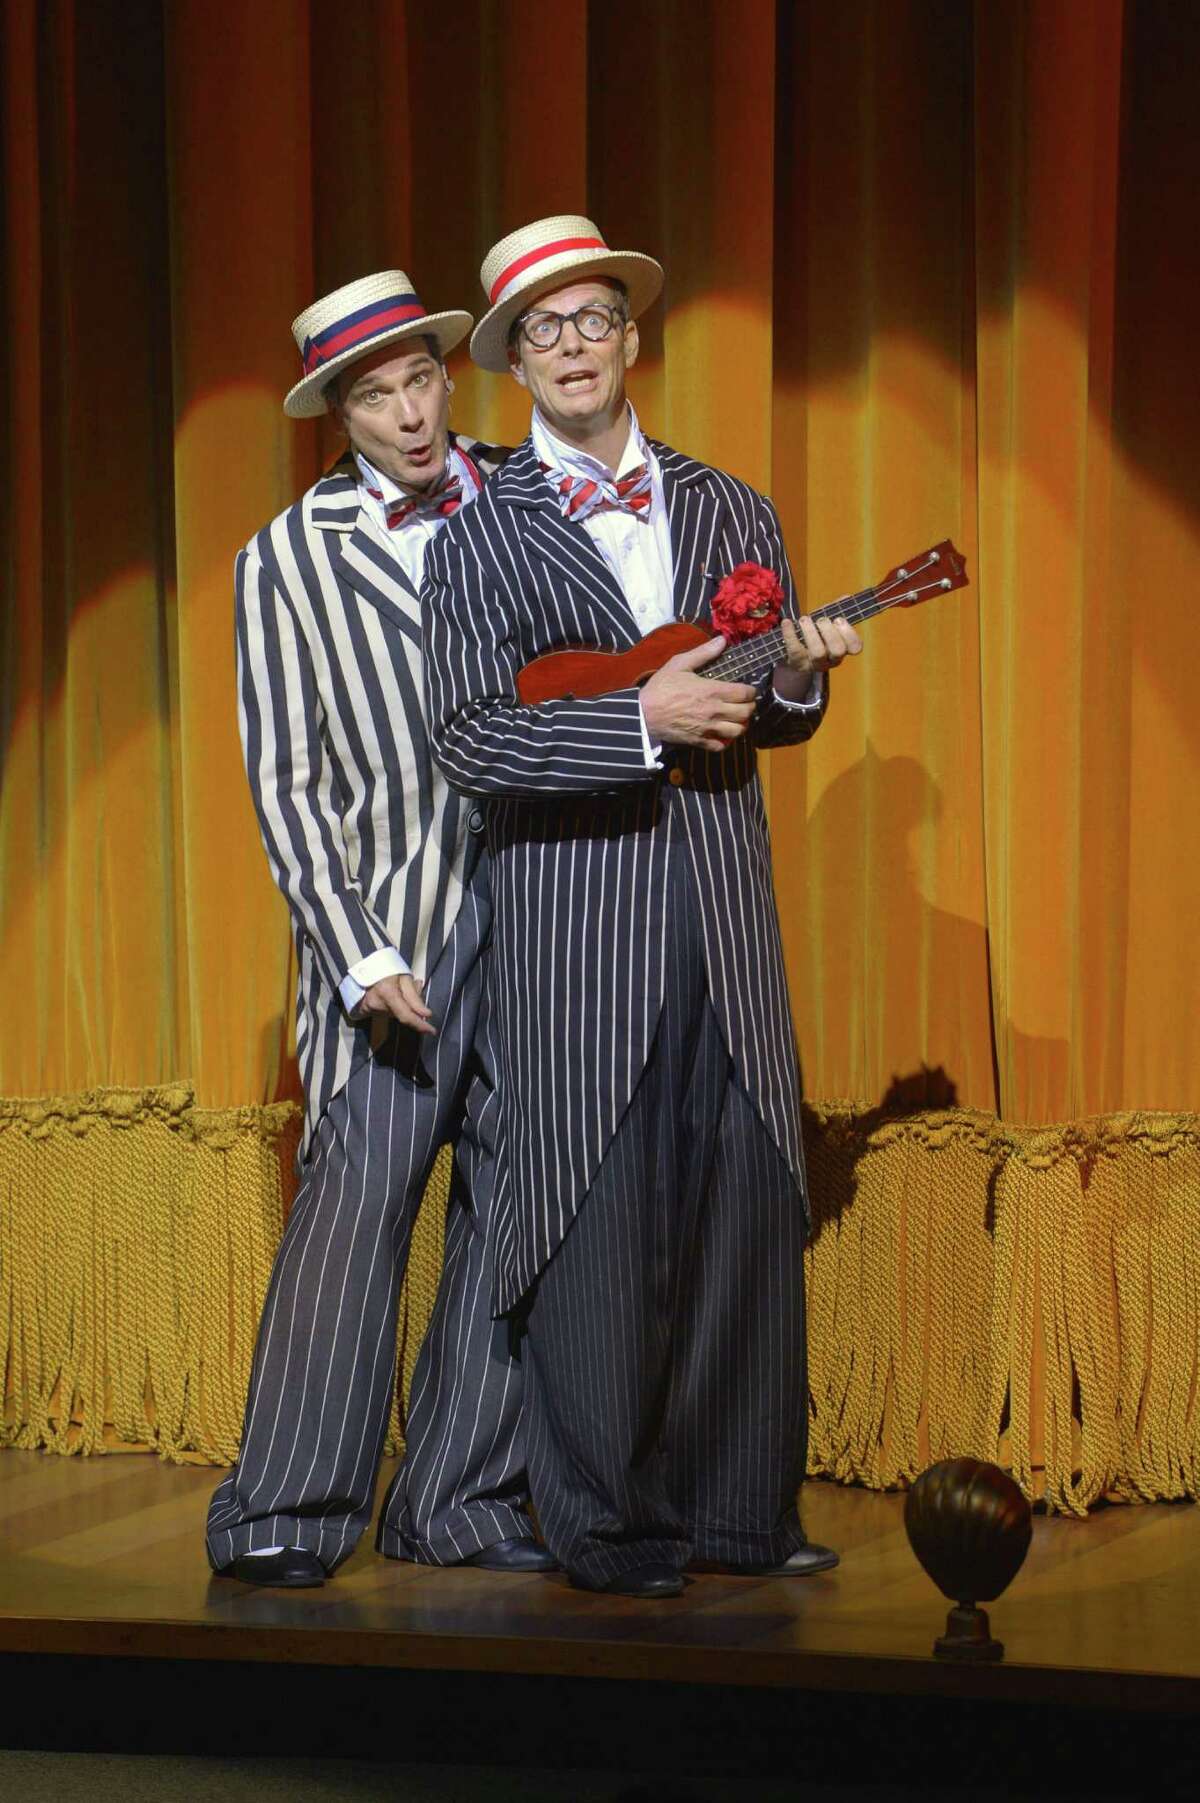 David Shiner (left) and Bill Irwin in "Old Hats" at ACT